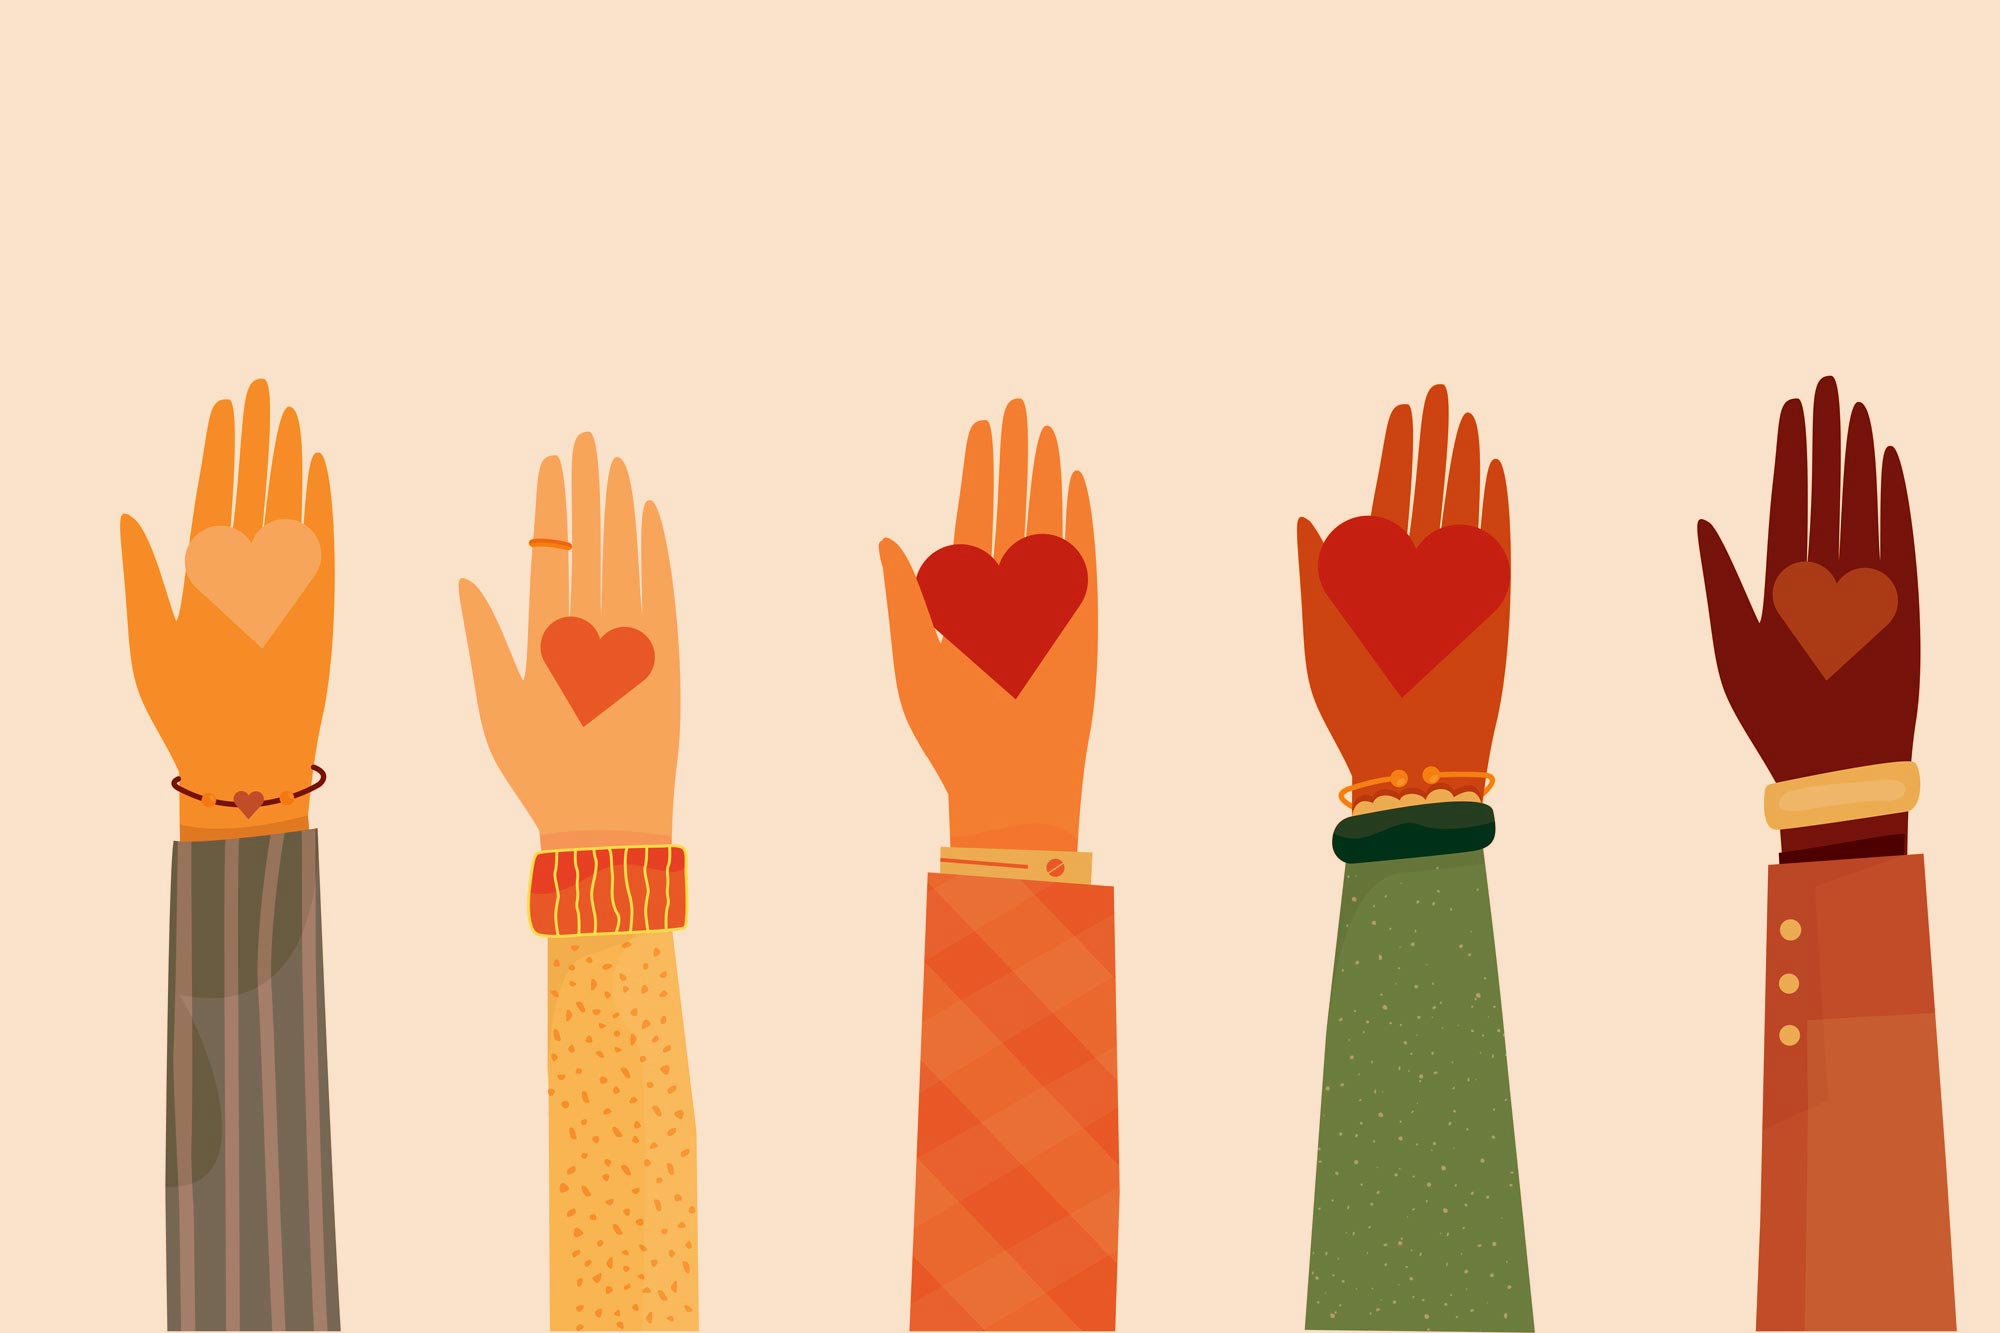 Illustration of 5 different colored hands raised each with a different colored heart in their hand